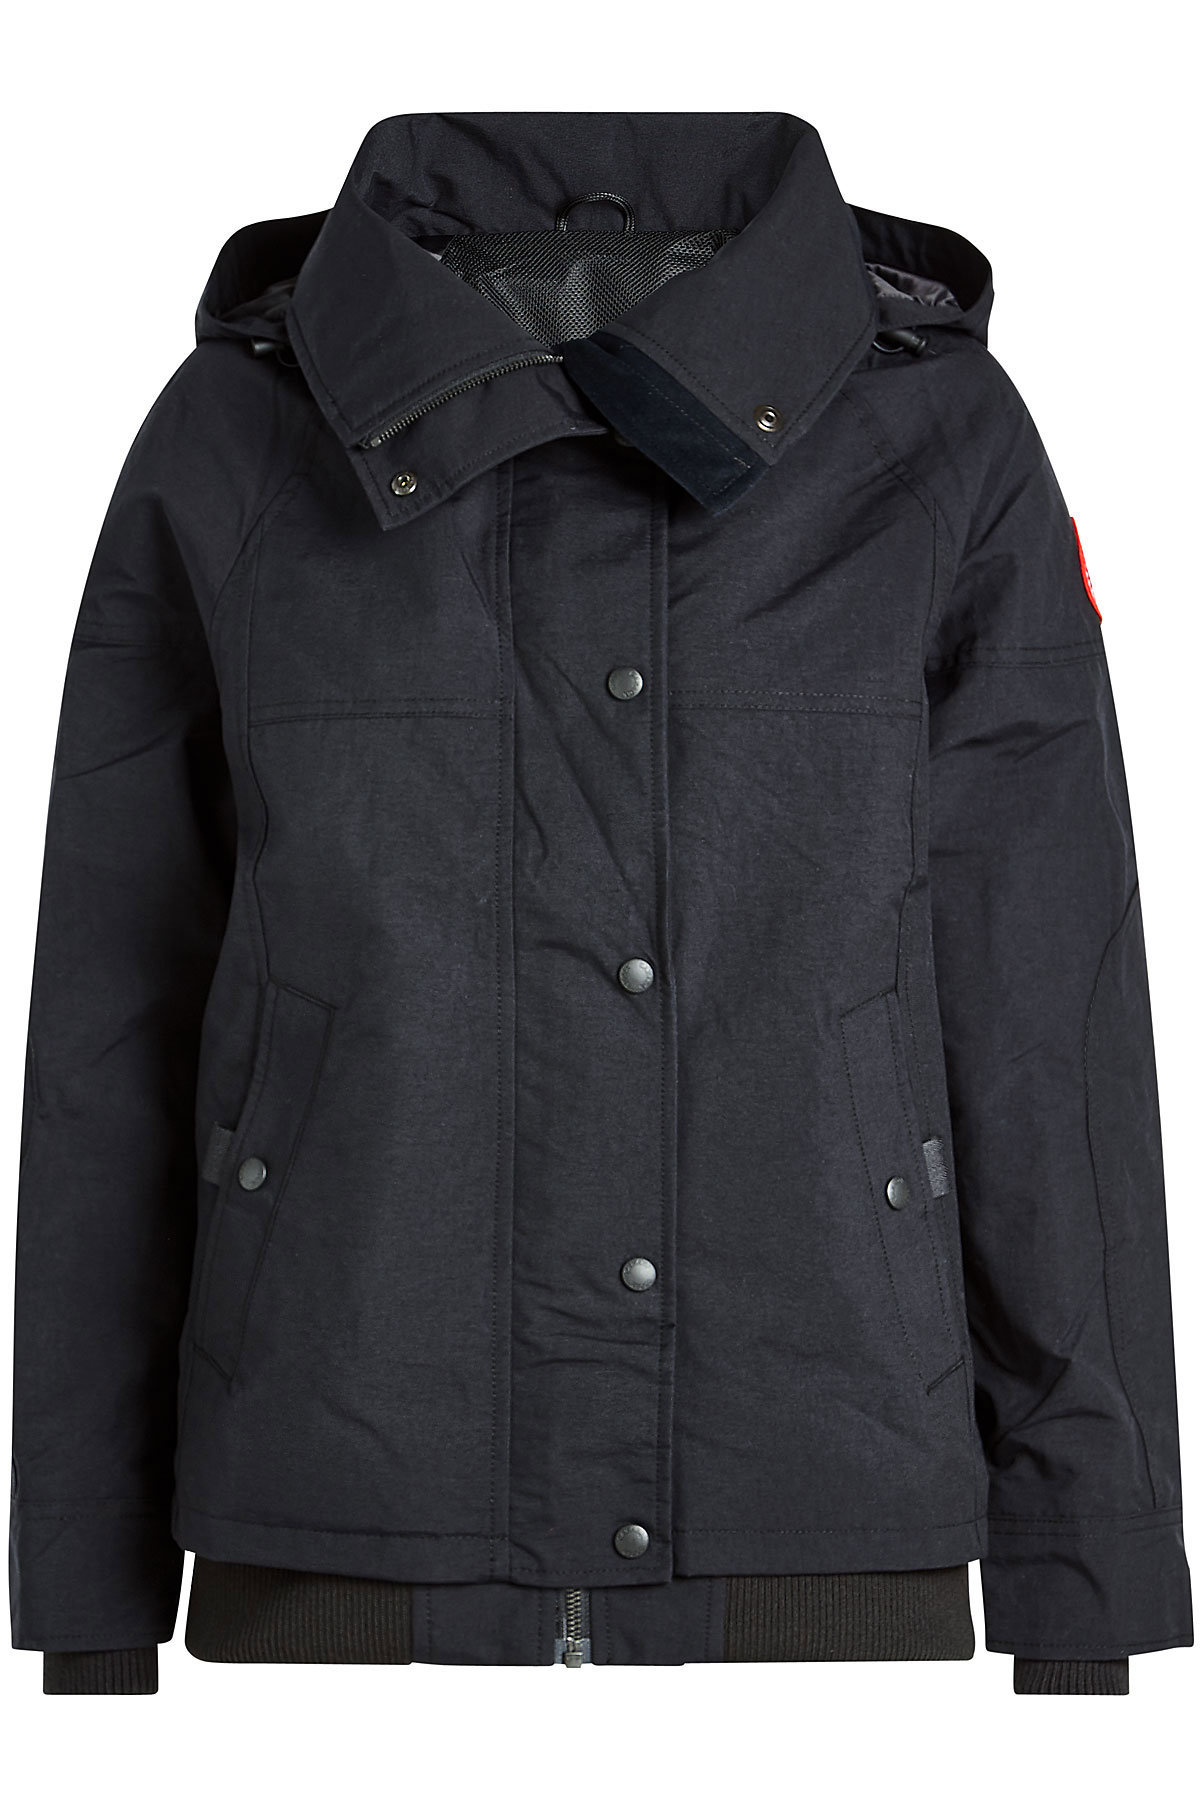 Chinook Jacket by Canada Goose